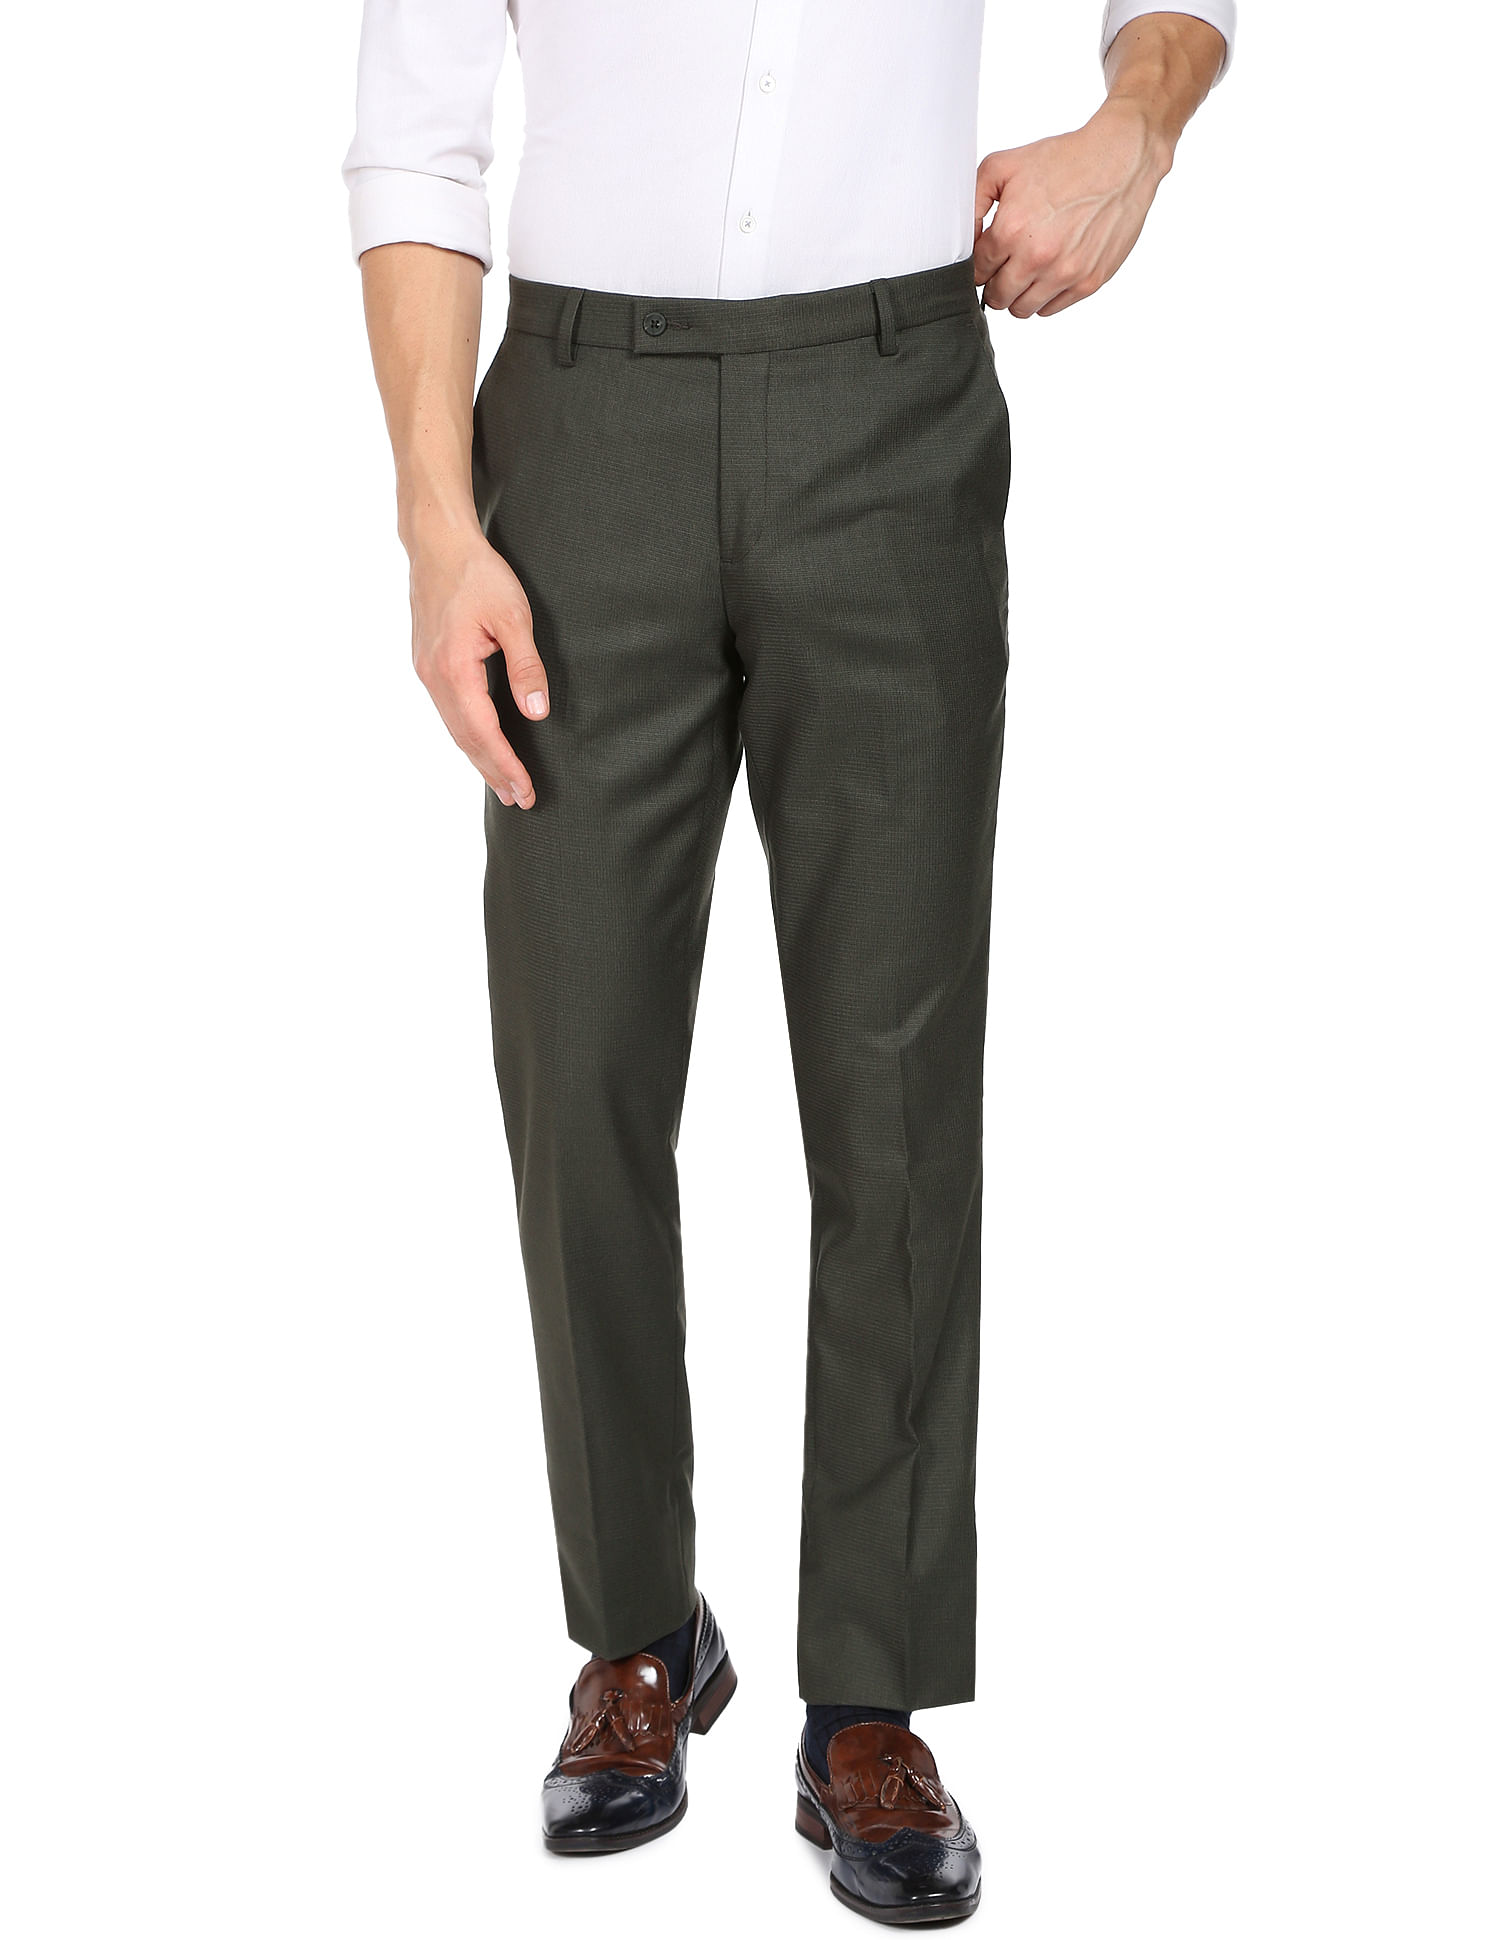 Buy De NoVo Men's Regular Formal Trouser | Stylish Fit Men Wear Pants for  Office or Party | Mens Fashion Dress Trousers Pant (Pack of - 2) at  Amazon.in